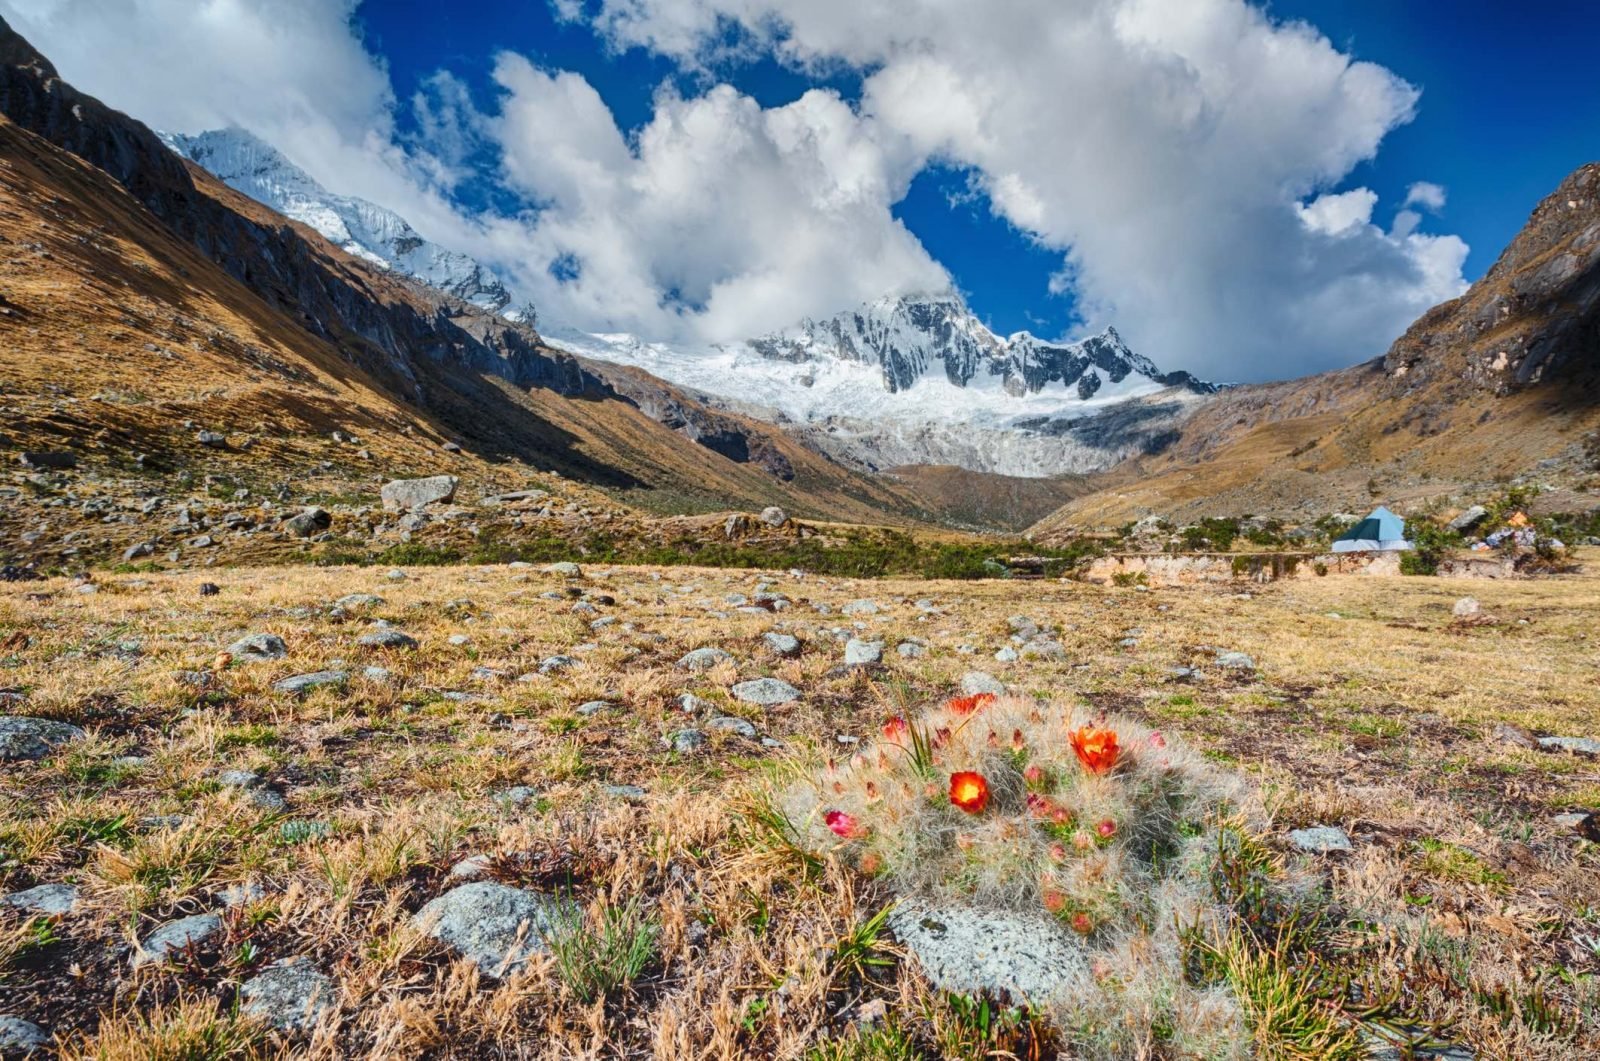 Huascarán National Park, views of snowcapped mountains and plains, with wildflowers in the foreground.